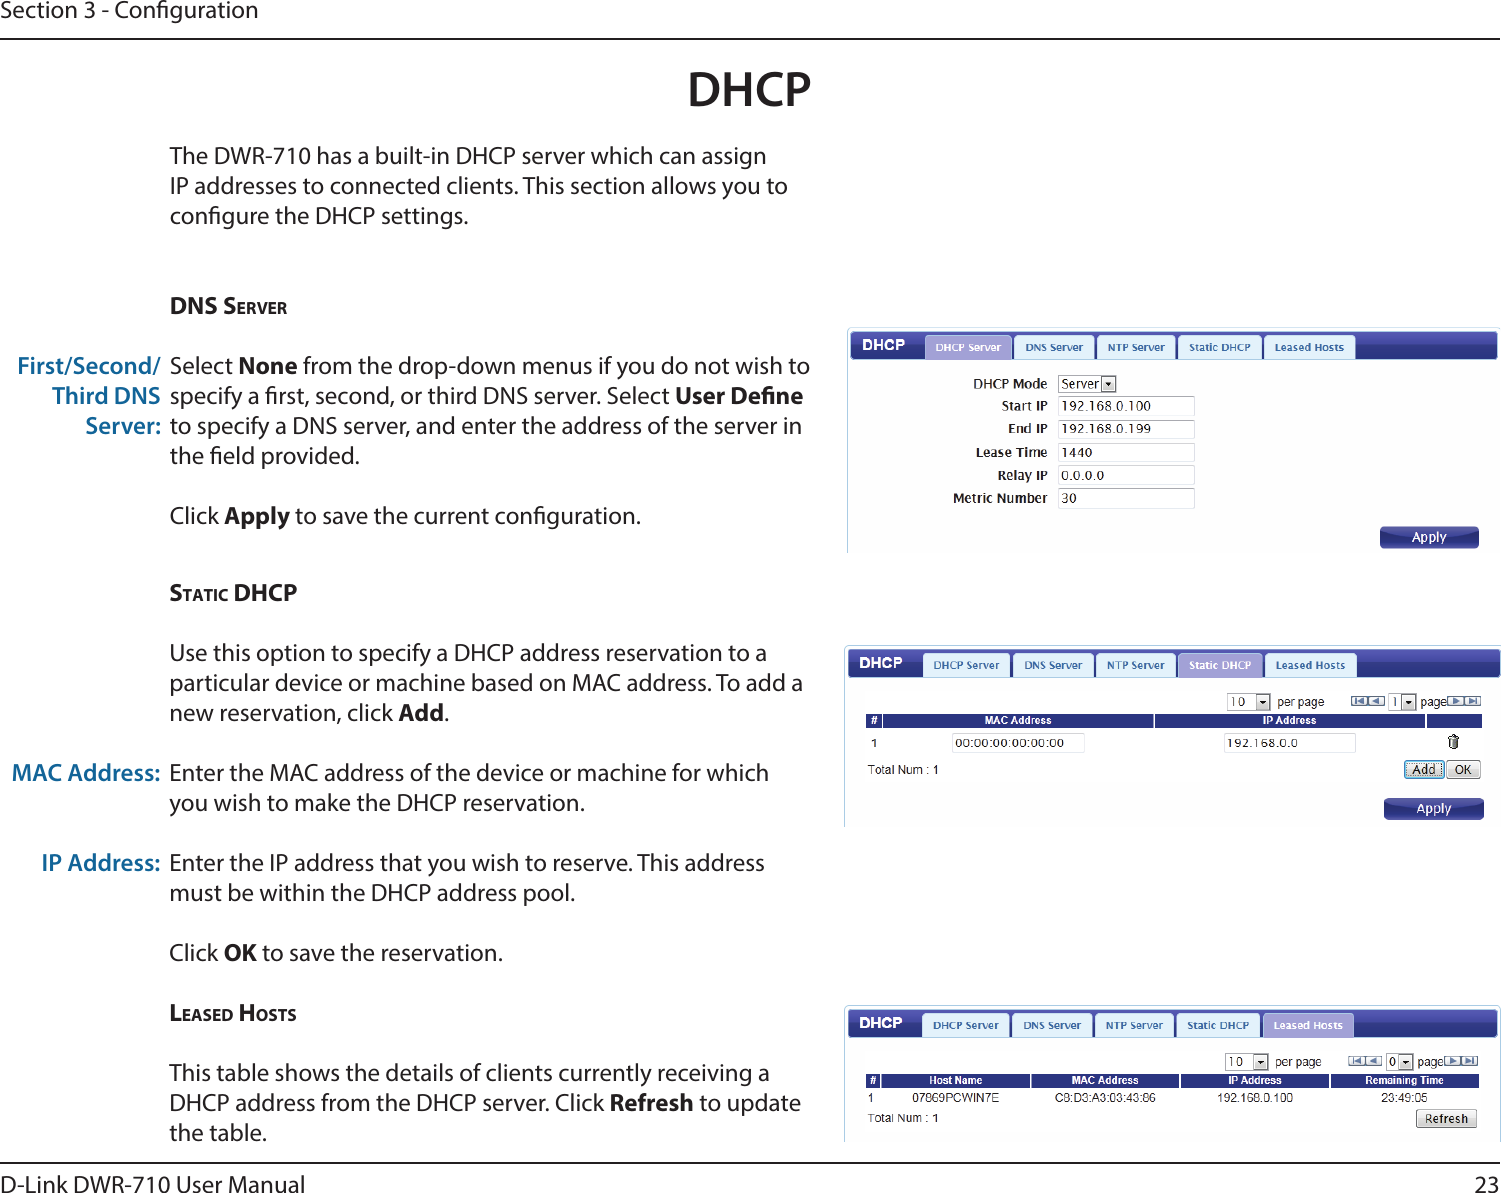 23D-Link DWR-710 User ManualSection 3 - CongurationDHCPThe DWR-710 has a built-in DHCP server which can assign IP addresses to connected clients. This section allows you to congure the DHCP settings. DNs serverSelect None from the drop-down menus if you do not wish to specify a rst, second, or third DNS server. Select User Dene to specify a DNS server, and enter the address of the server in the eld provided. Click Apply to save the current conguration. First/Second/Third DNS Server:stAtiC DHCpUse this option to specify a DHCP address reservation to a particular device or machine based on MAC address. To add a new reservation, click Add.Enter the MAC address of the device or machine for which you wish to make the DHCP reservation.Enter the IP address that you wish to reserve. This address must be within the DHCP address pool.Click OK to save the reservation. LeAseD HostsThis table shows the details of clients currently receiving a DHCP address from the DHCP server. Click Refresh to update the table. MAC Address:IP Address: